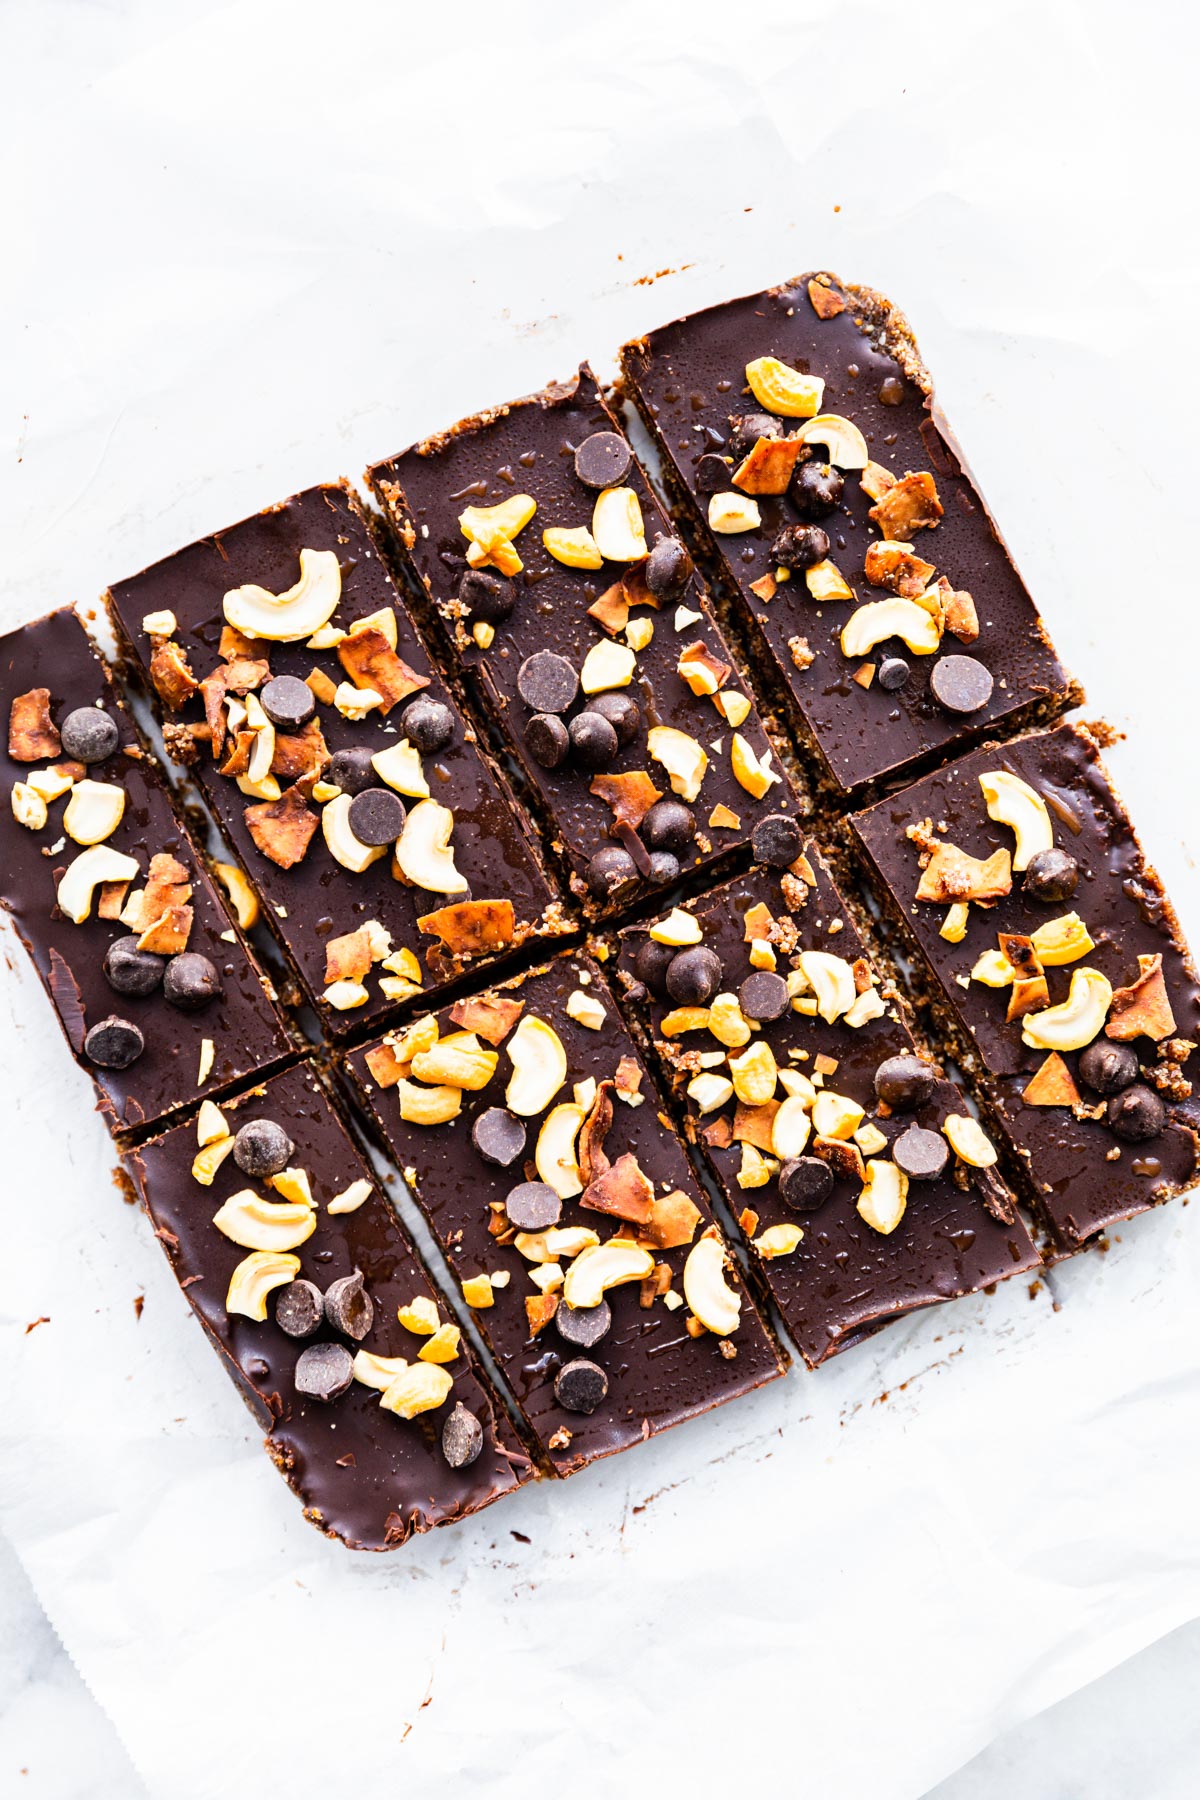 Chocolate cashew fig bars topped with chocolate, cashews, toasted coconut and chocolate chips cut into eight bars.